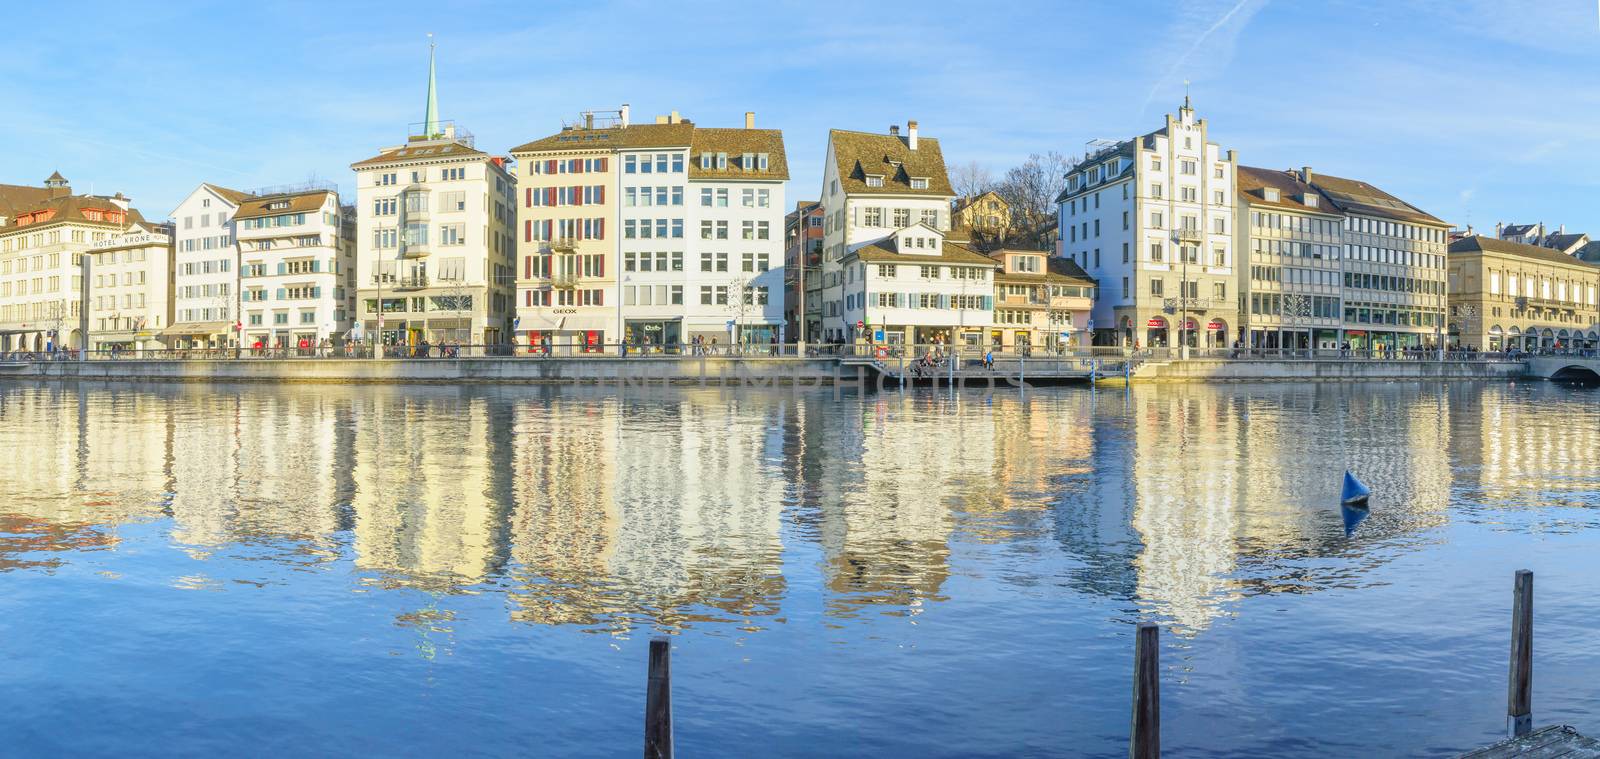 ZURICH, SWITZERLAND - DECEMBER 25, 2015: View of the Old Town (Altstadt), on the east bank of the Limmat River, with local businesses, locals and visitors. In Zurich, Switzerland